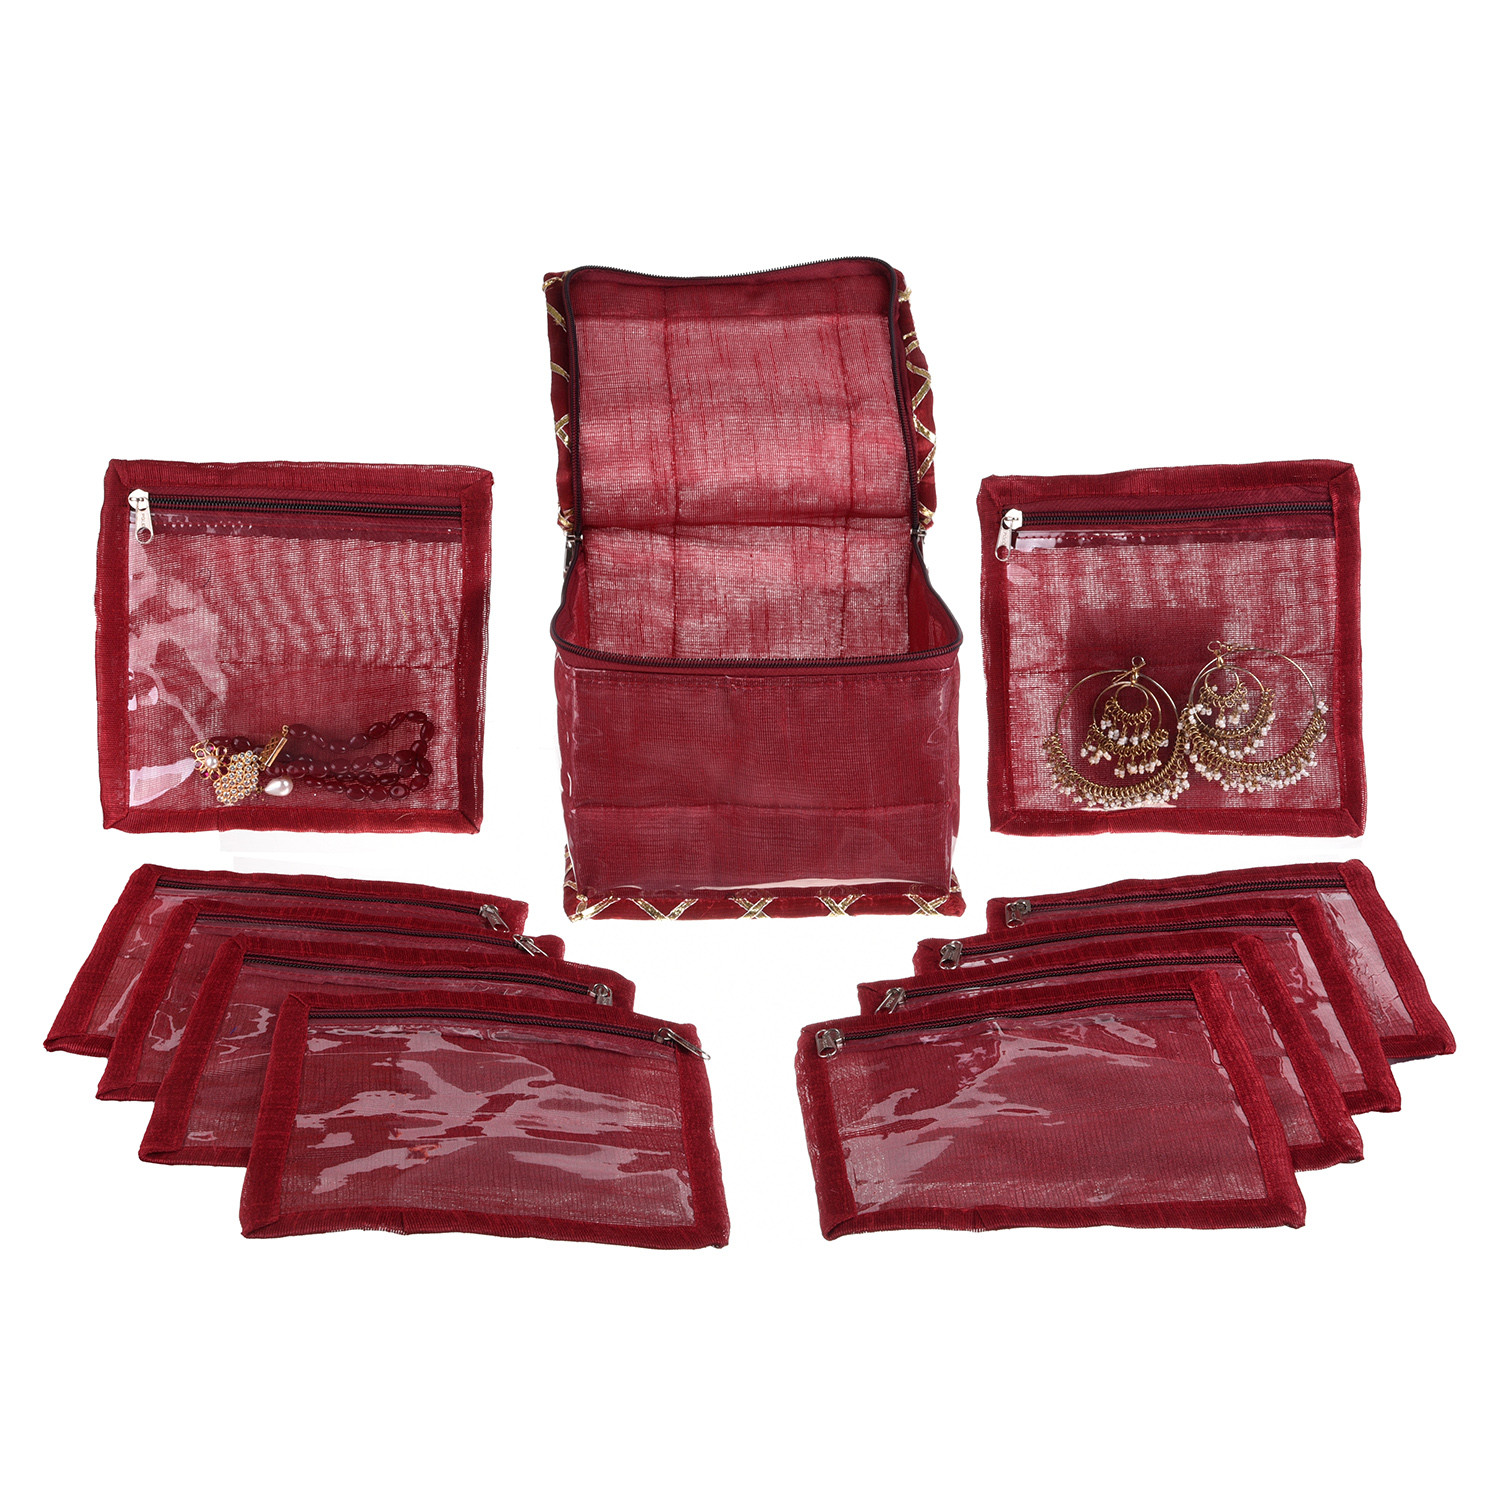 Kuber Industries Jewellery Organizer | PVC Laminated Gota Check Design Vanity Organizer for Women | Cosmetic kit with 10 Transparent Pouches | Maroon